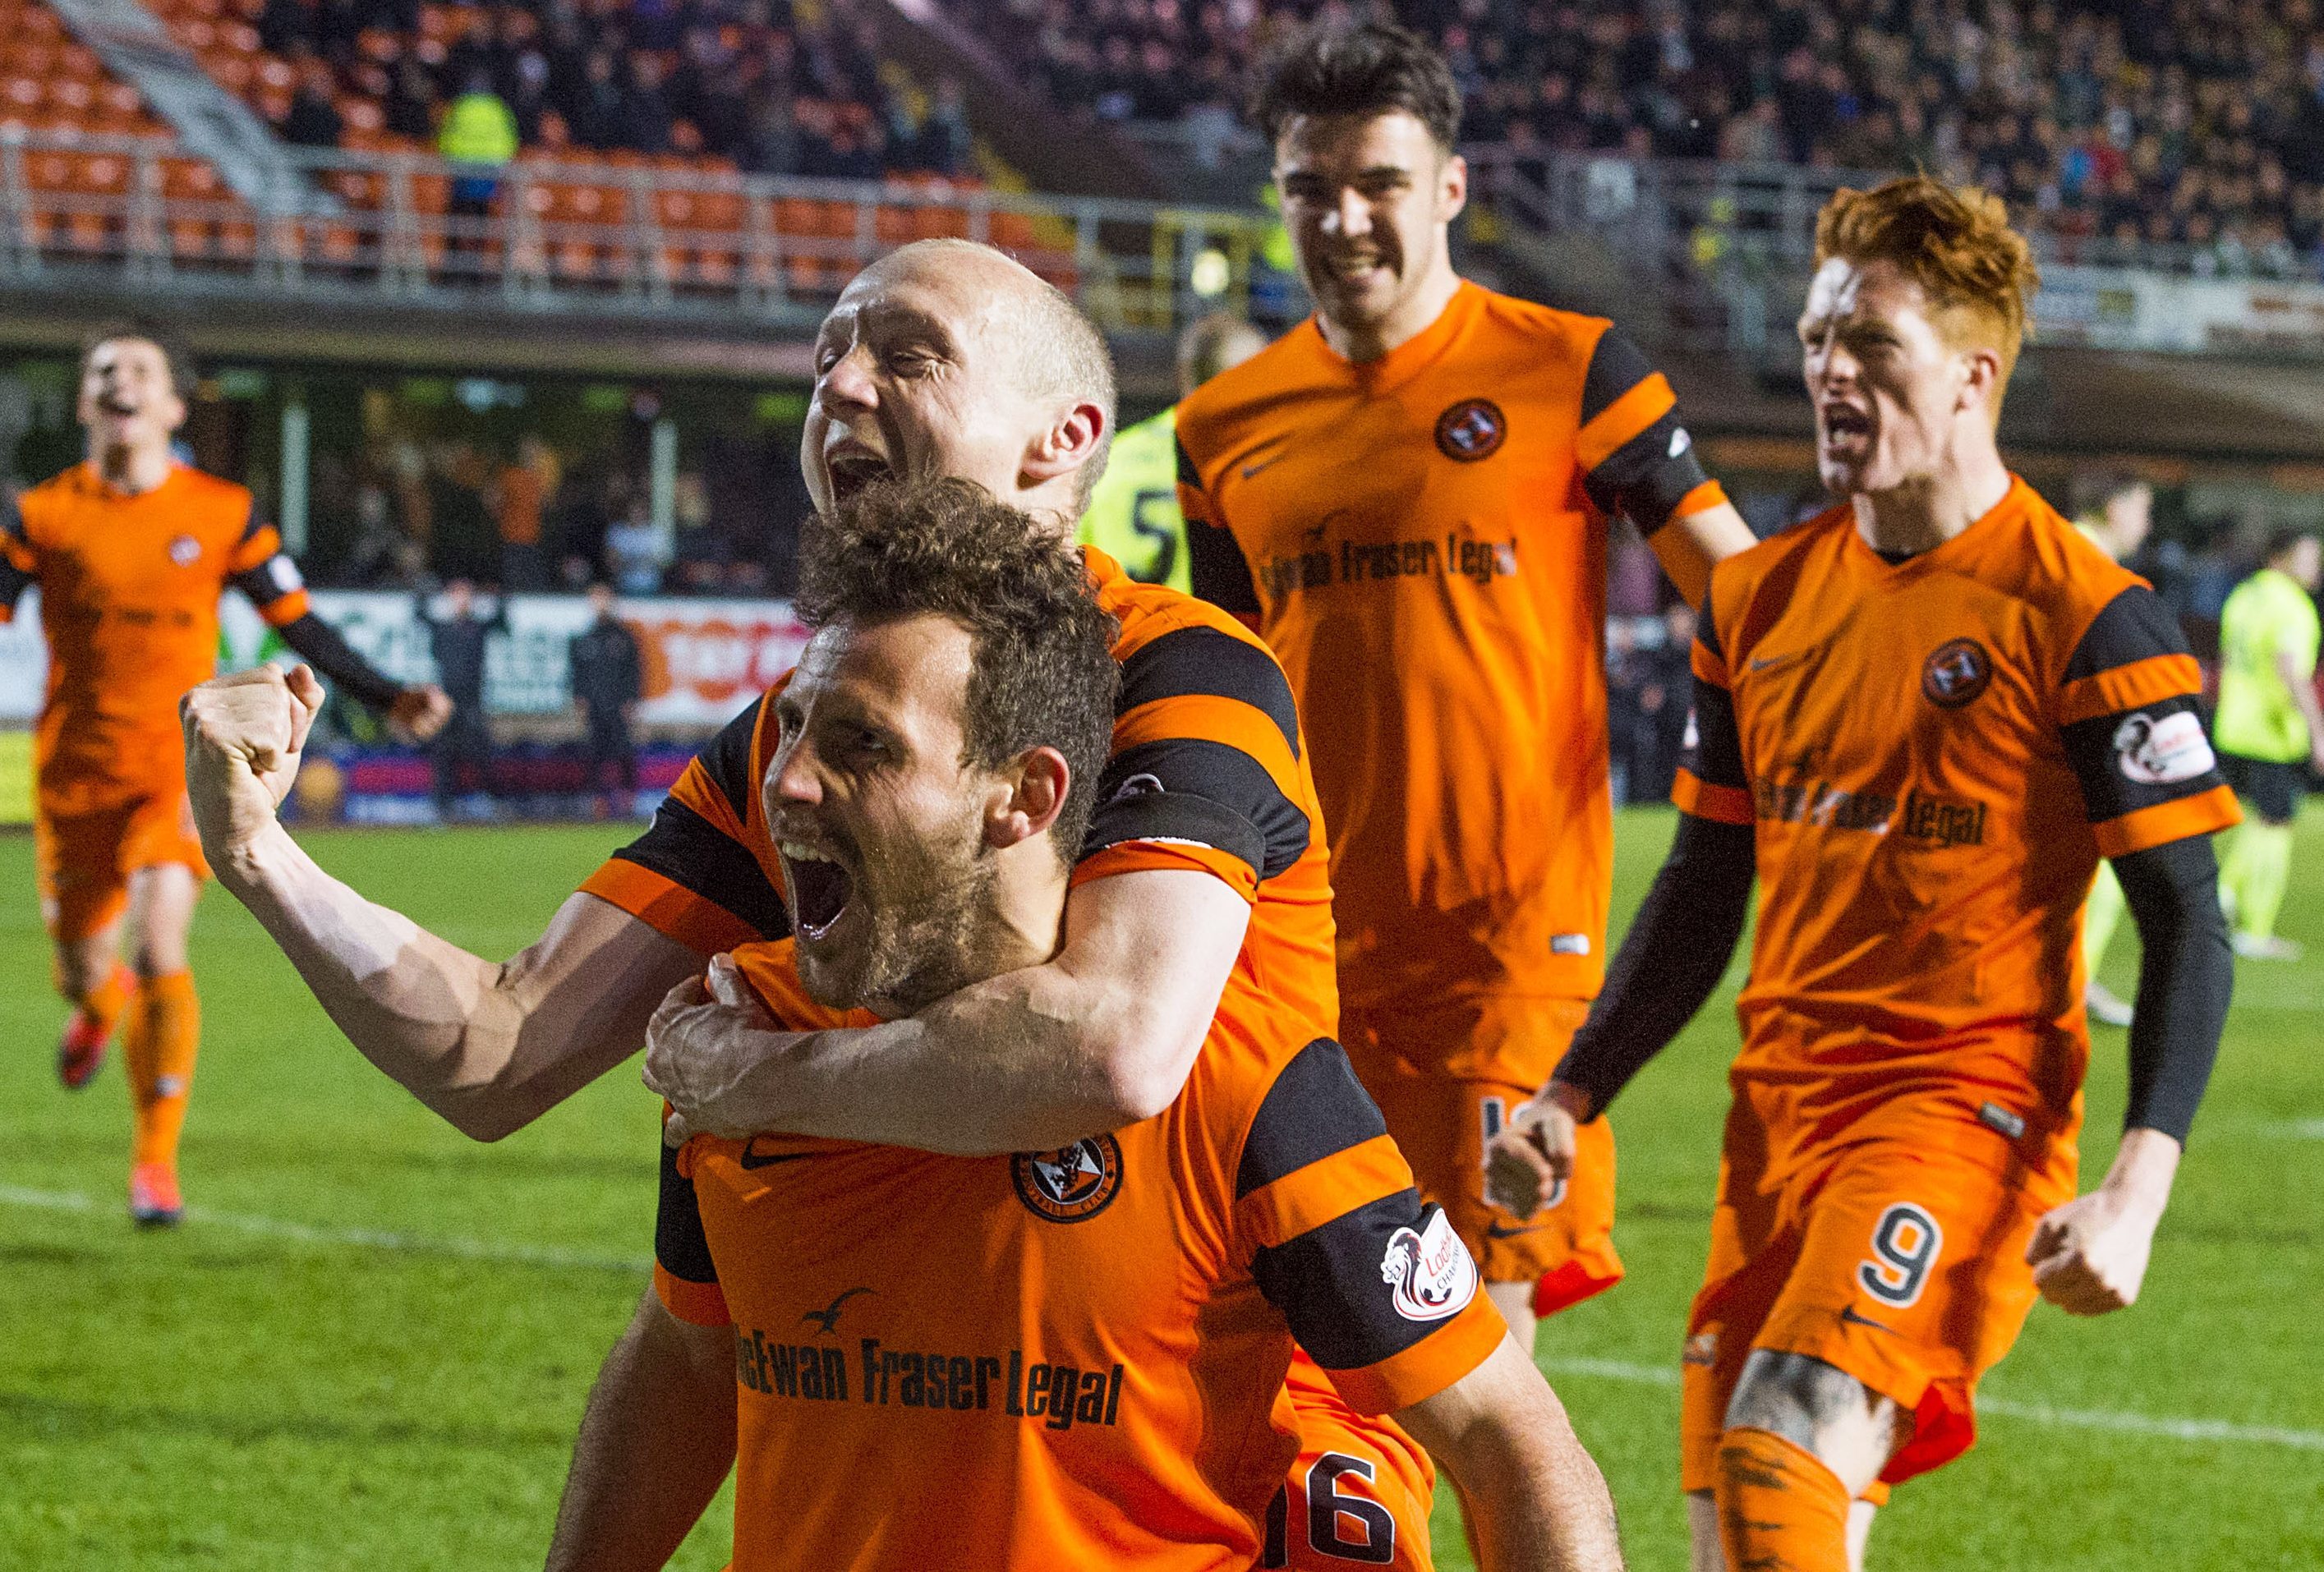 Dundee United fans will be hoping to see celebrations like this again.